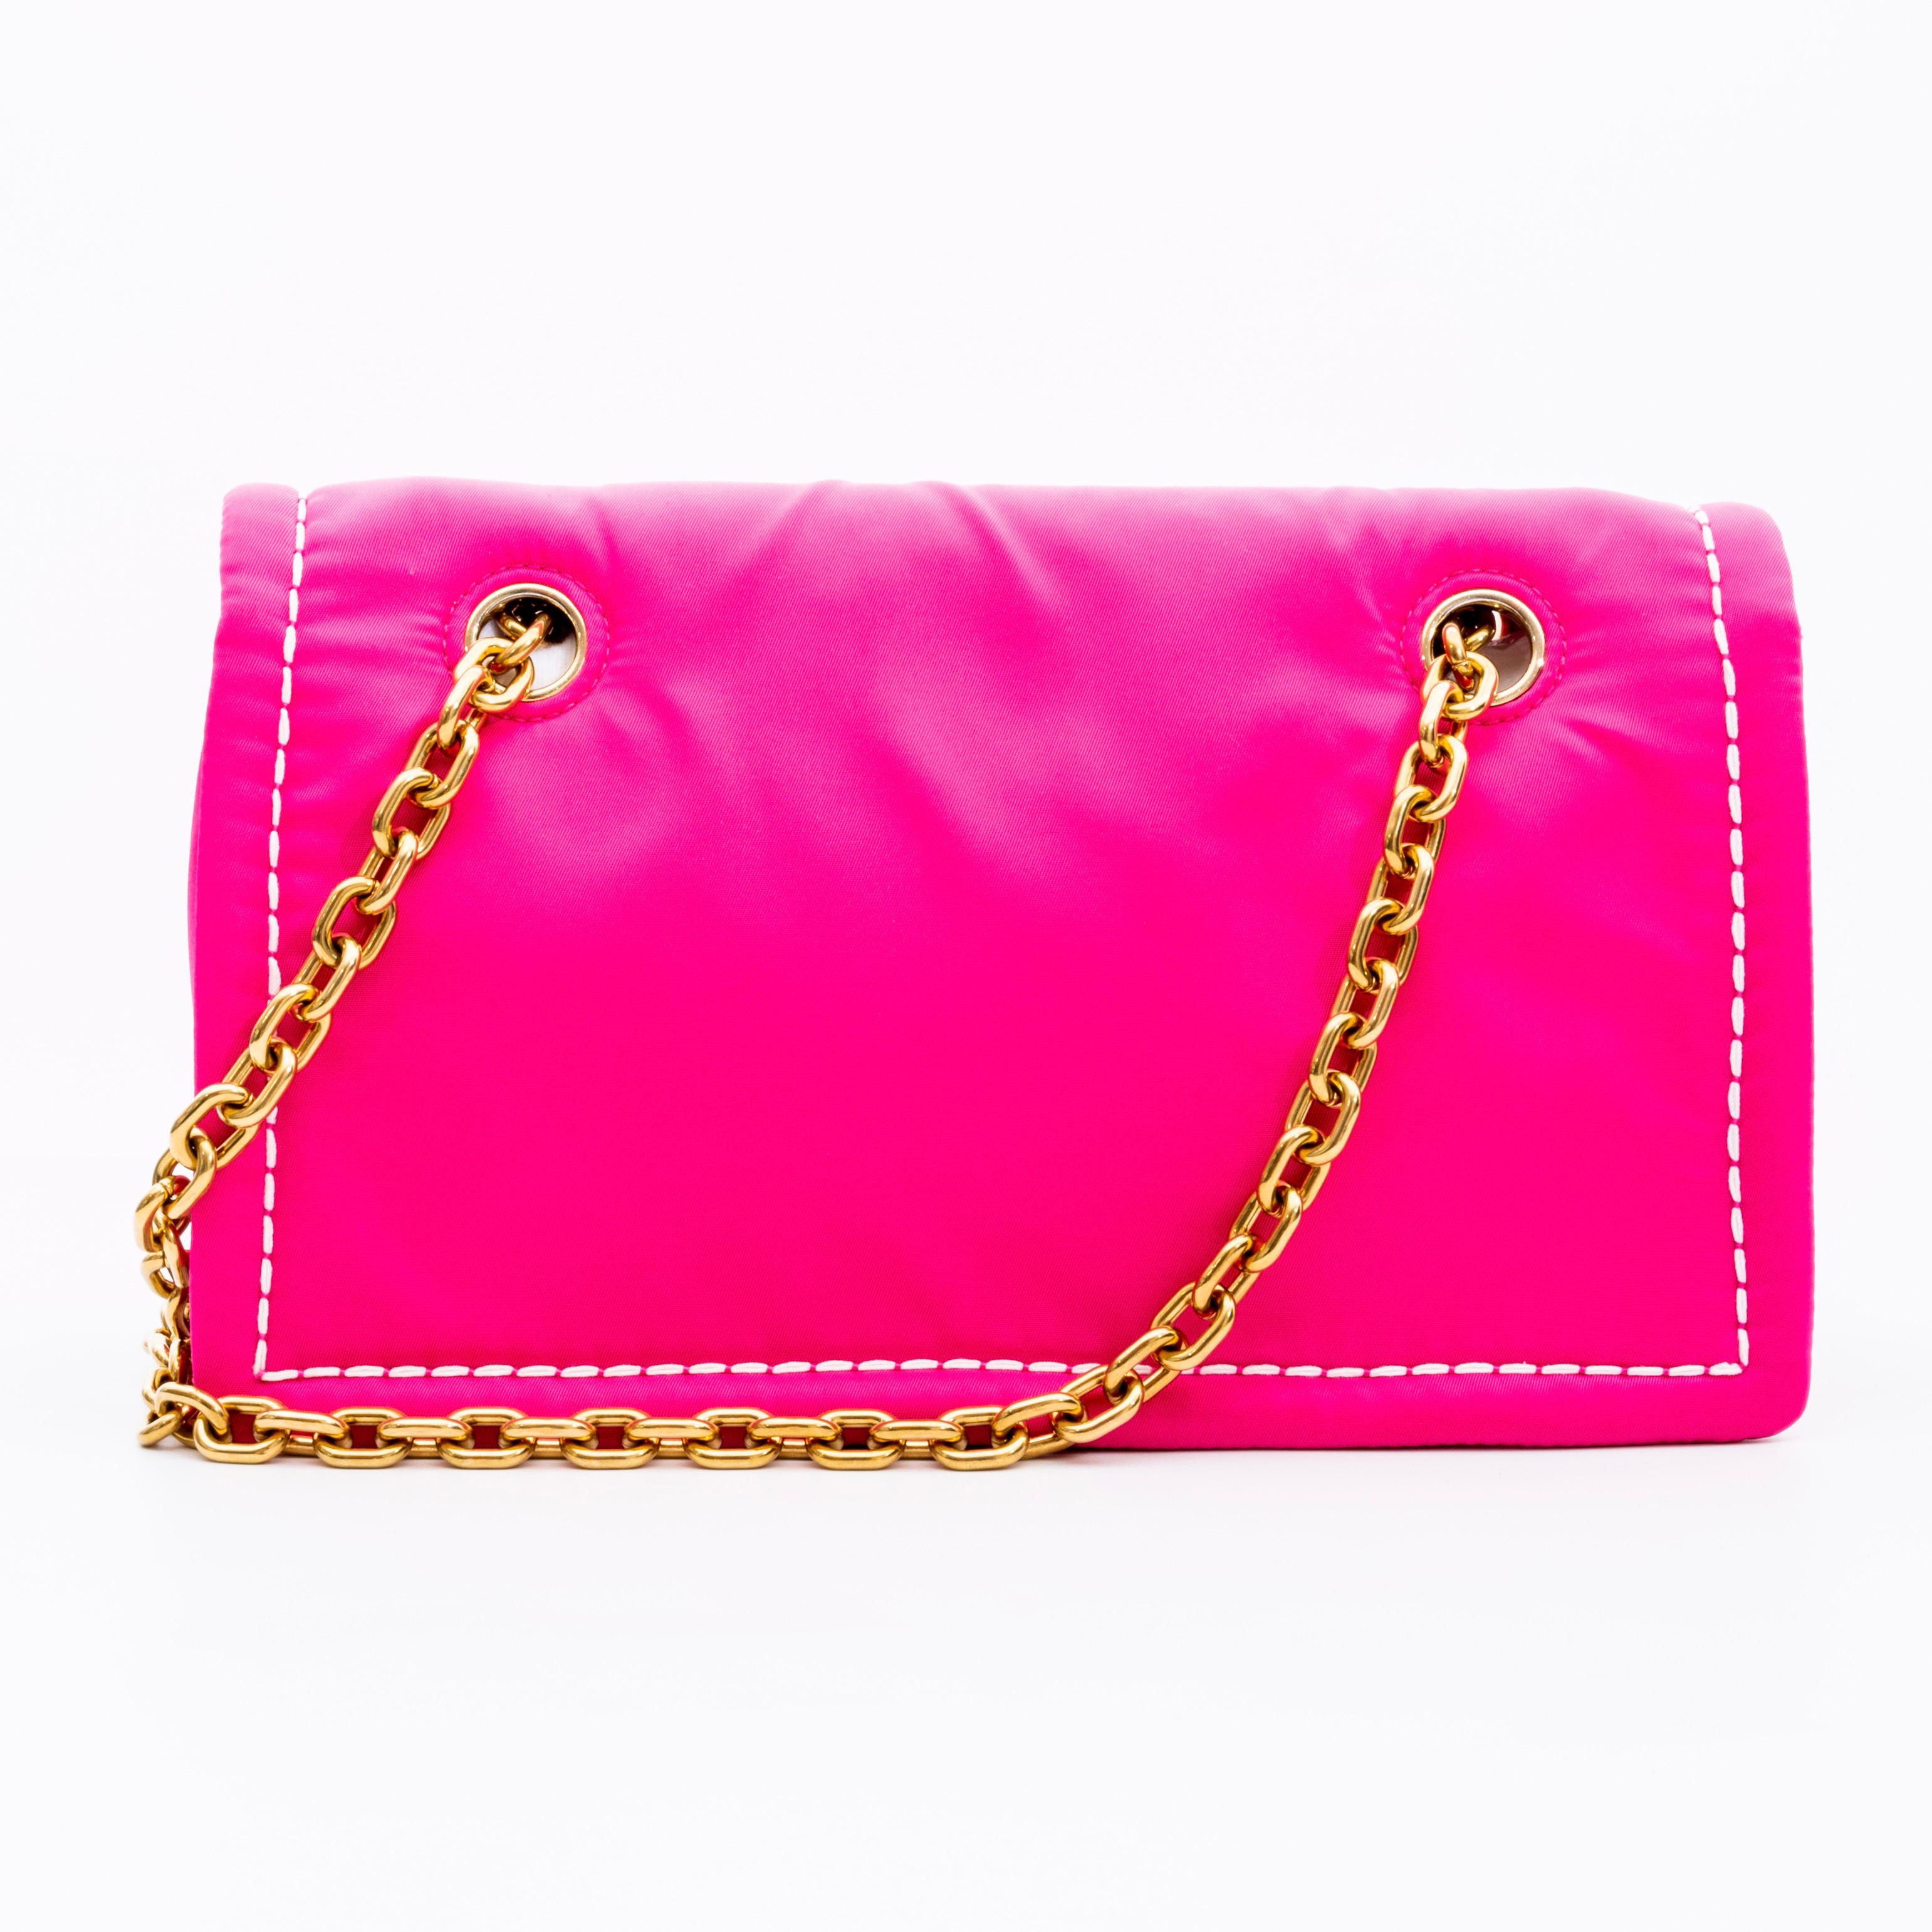 This bag is made with pink nylon and features white contrasting stitching, gold tone hardware, a front logo plaque, shoulder pad and a matching interior in pink with a zip pocket.

COLOR: Pink
MATERIAL: Nylon
ITEM CODE: 25
MEASURES: H 6.5” x L 10” x